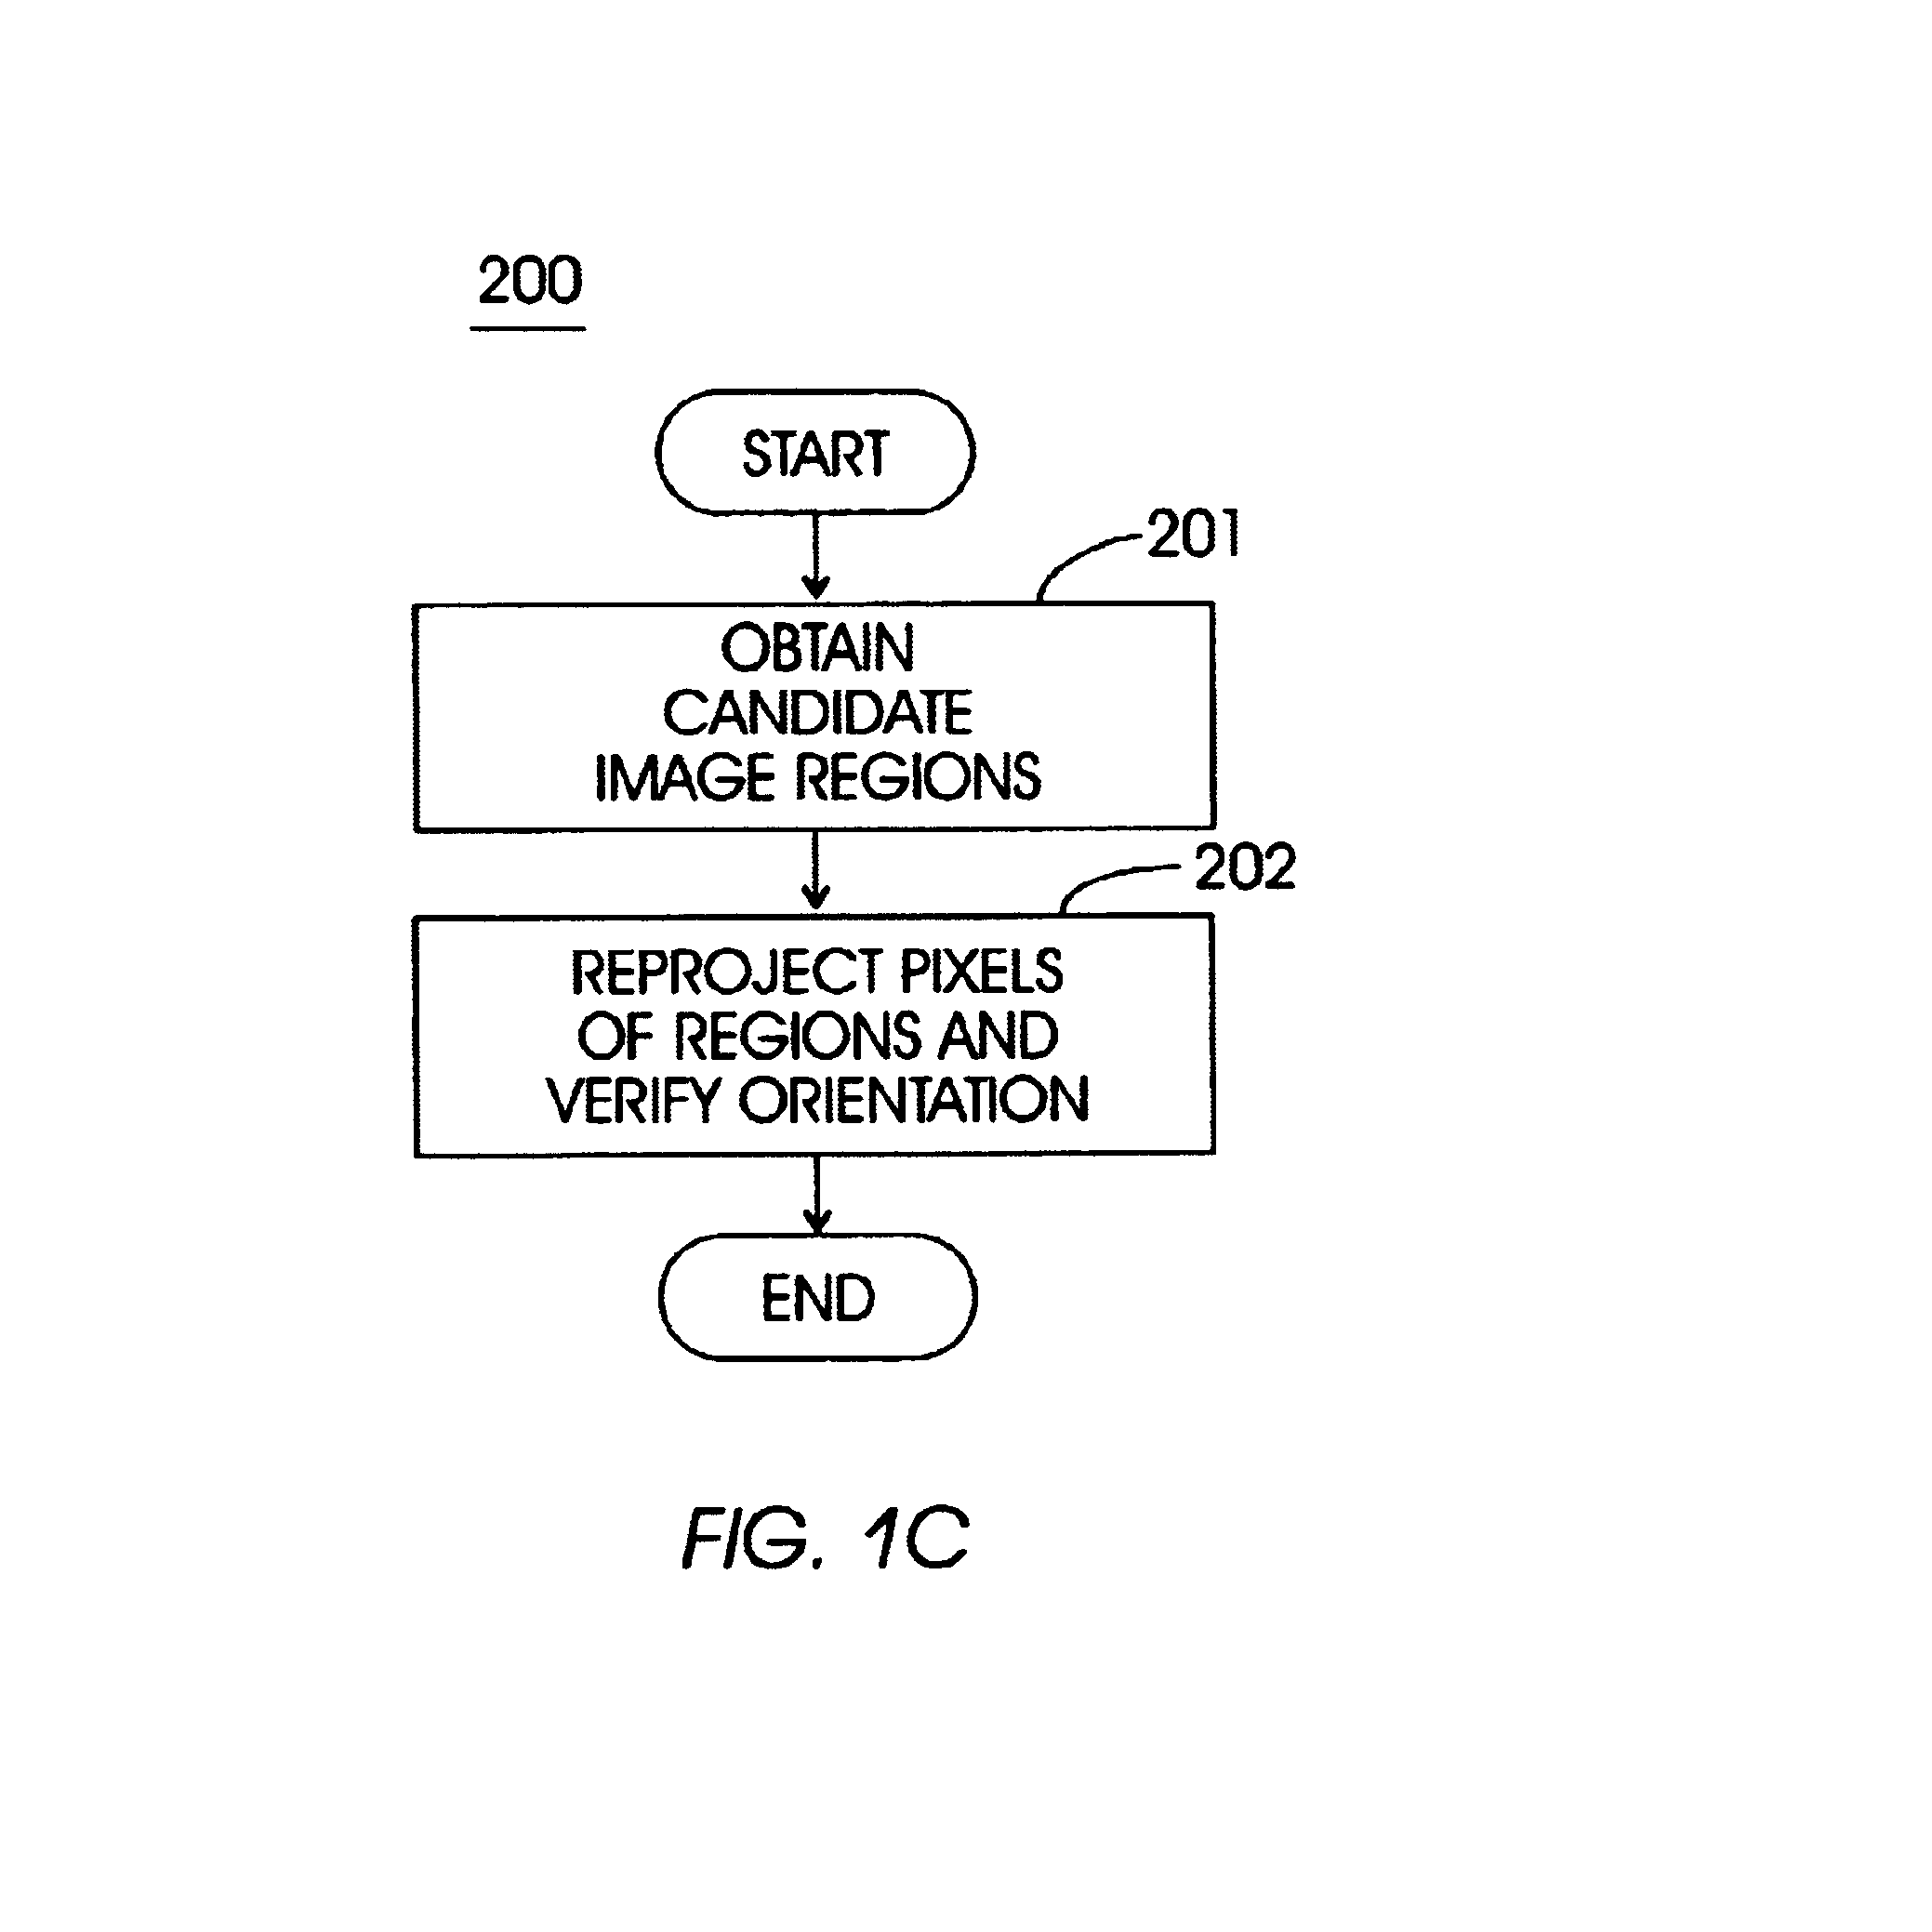 Method and apparatus for locating multi-region objects in an image or video database